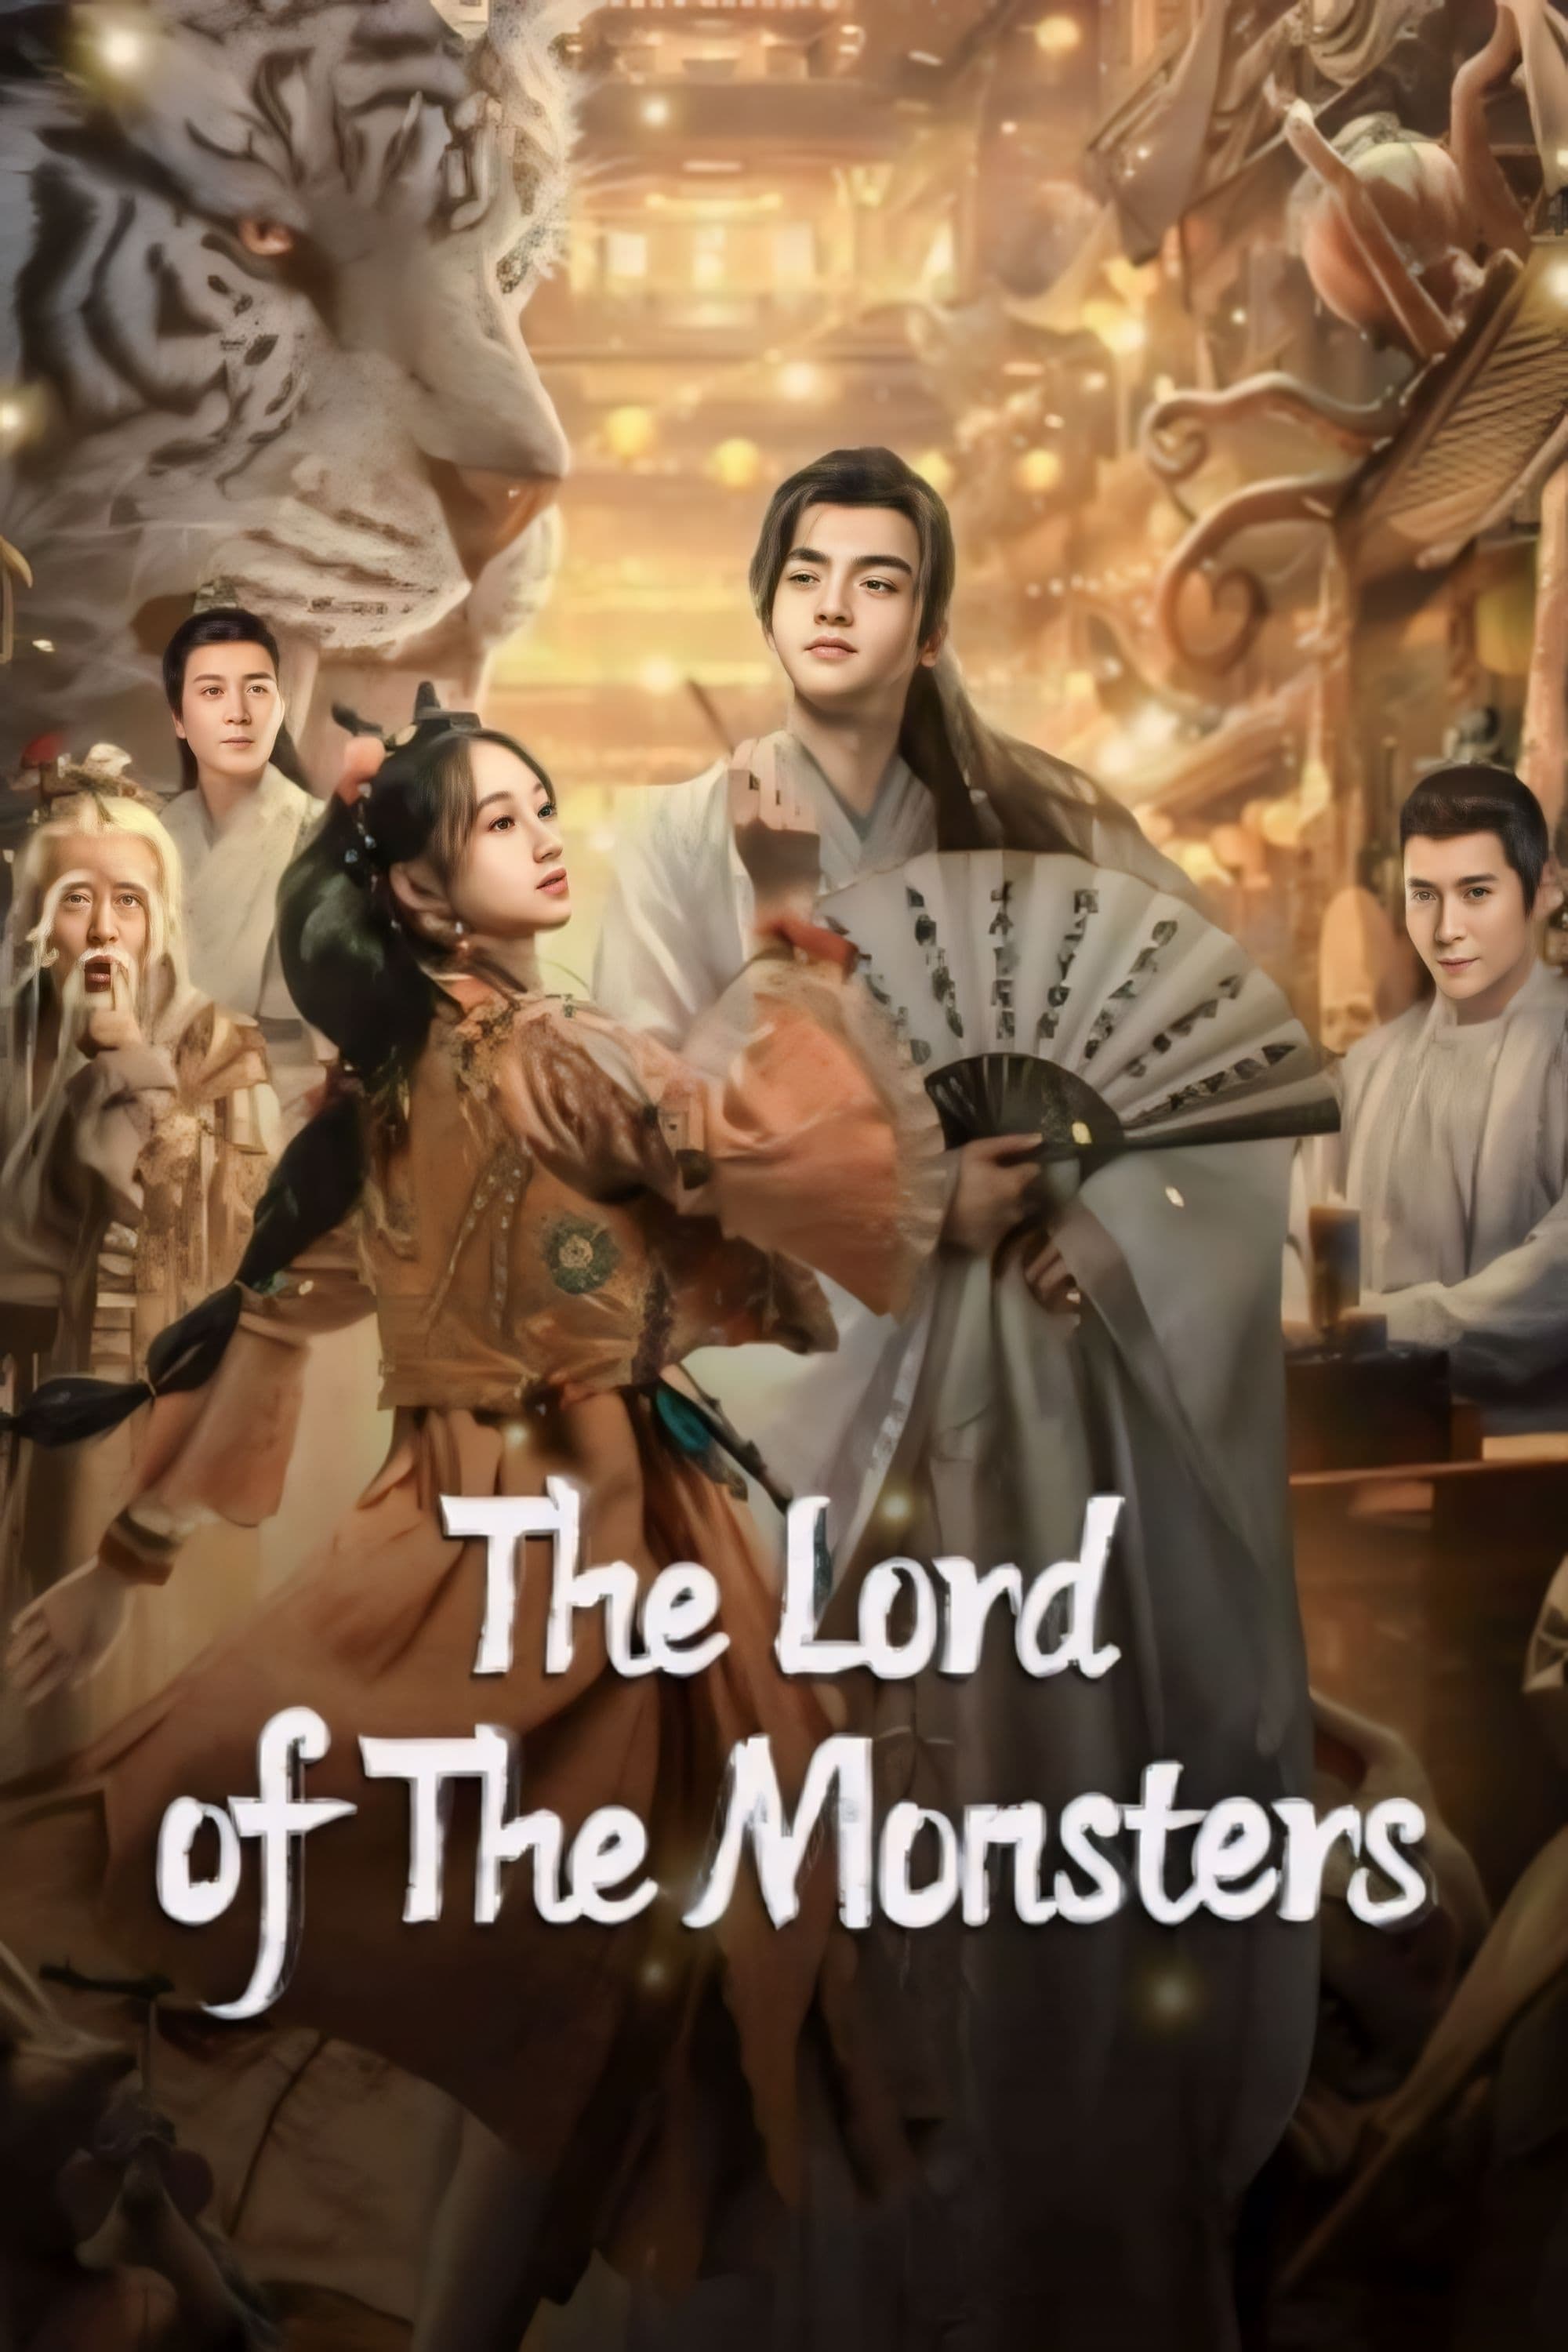 The Lord of The Monsters